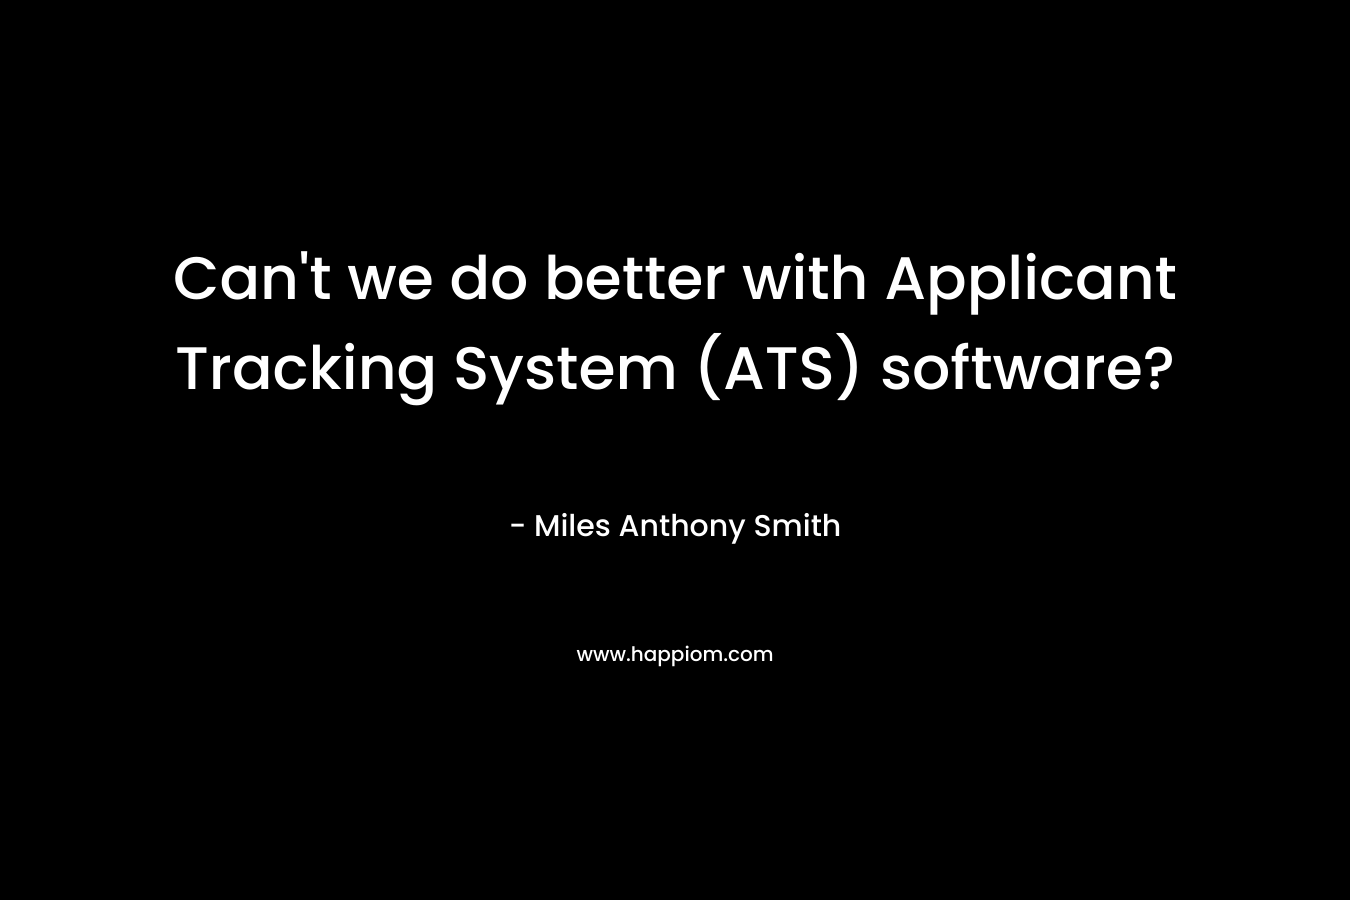 Can’t we do better with Applicant Tracking System (ATS) software? – Miles Anthony Smith